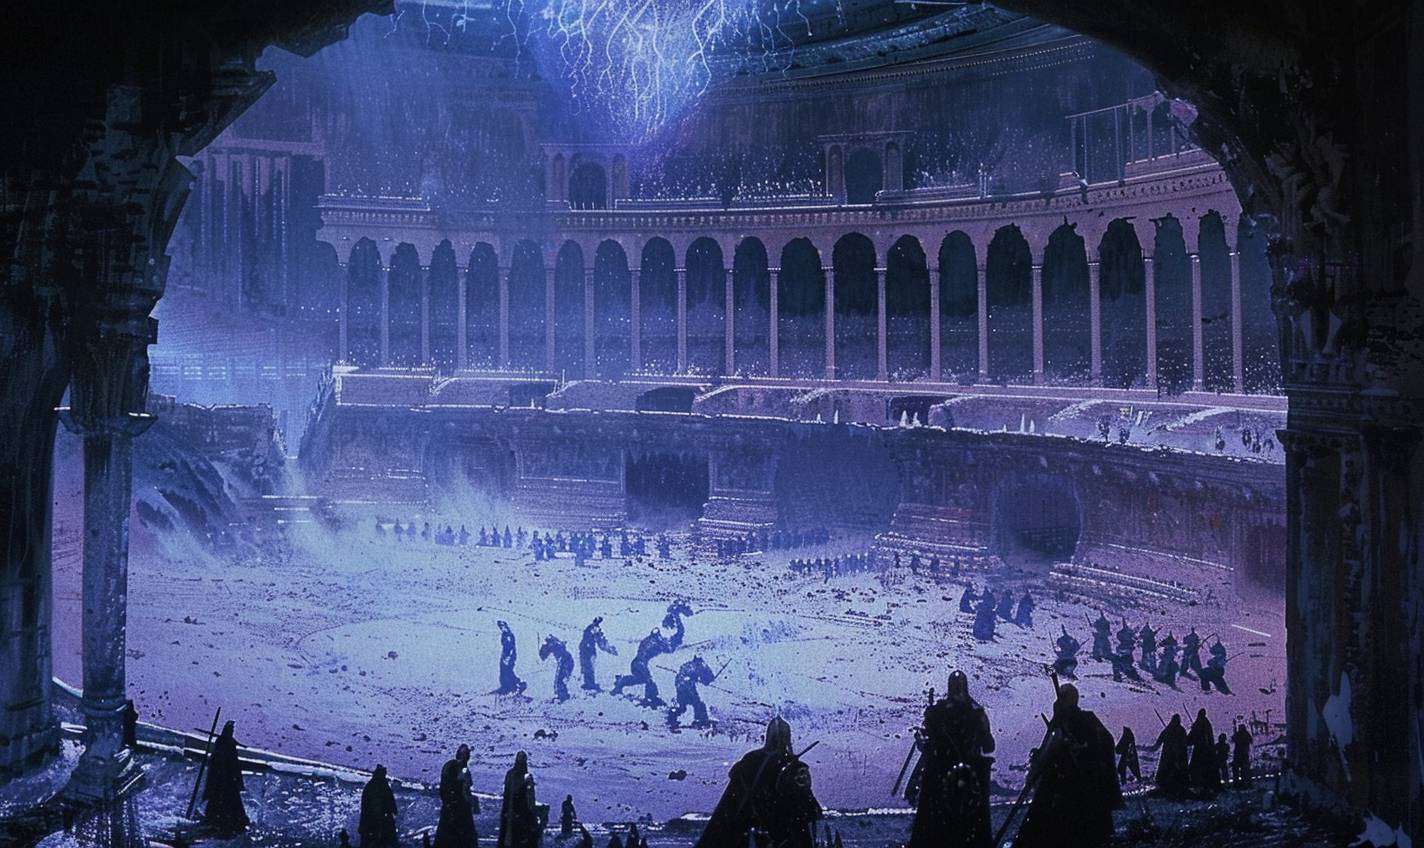 In the style of Kay Nielsen, spectral warriors clash in an ancient arena